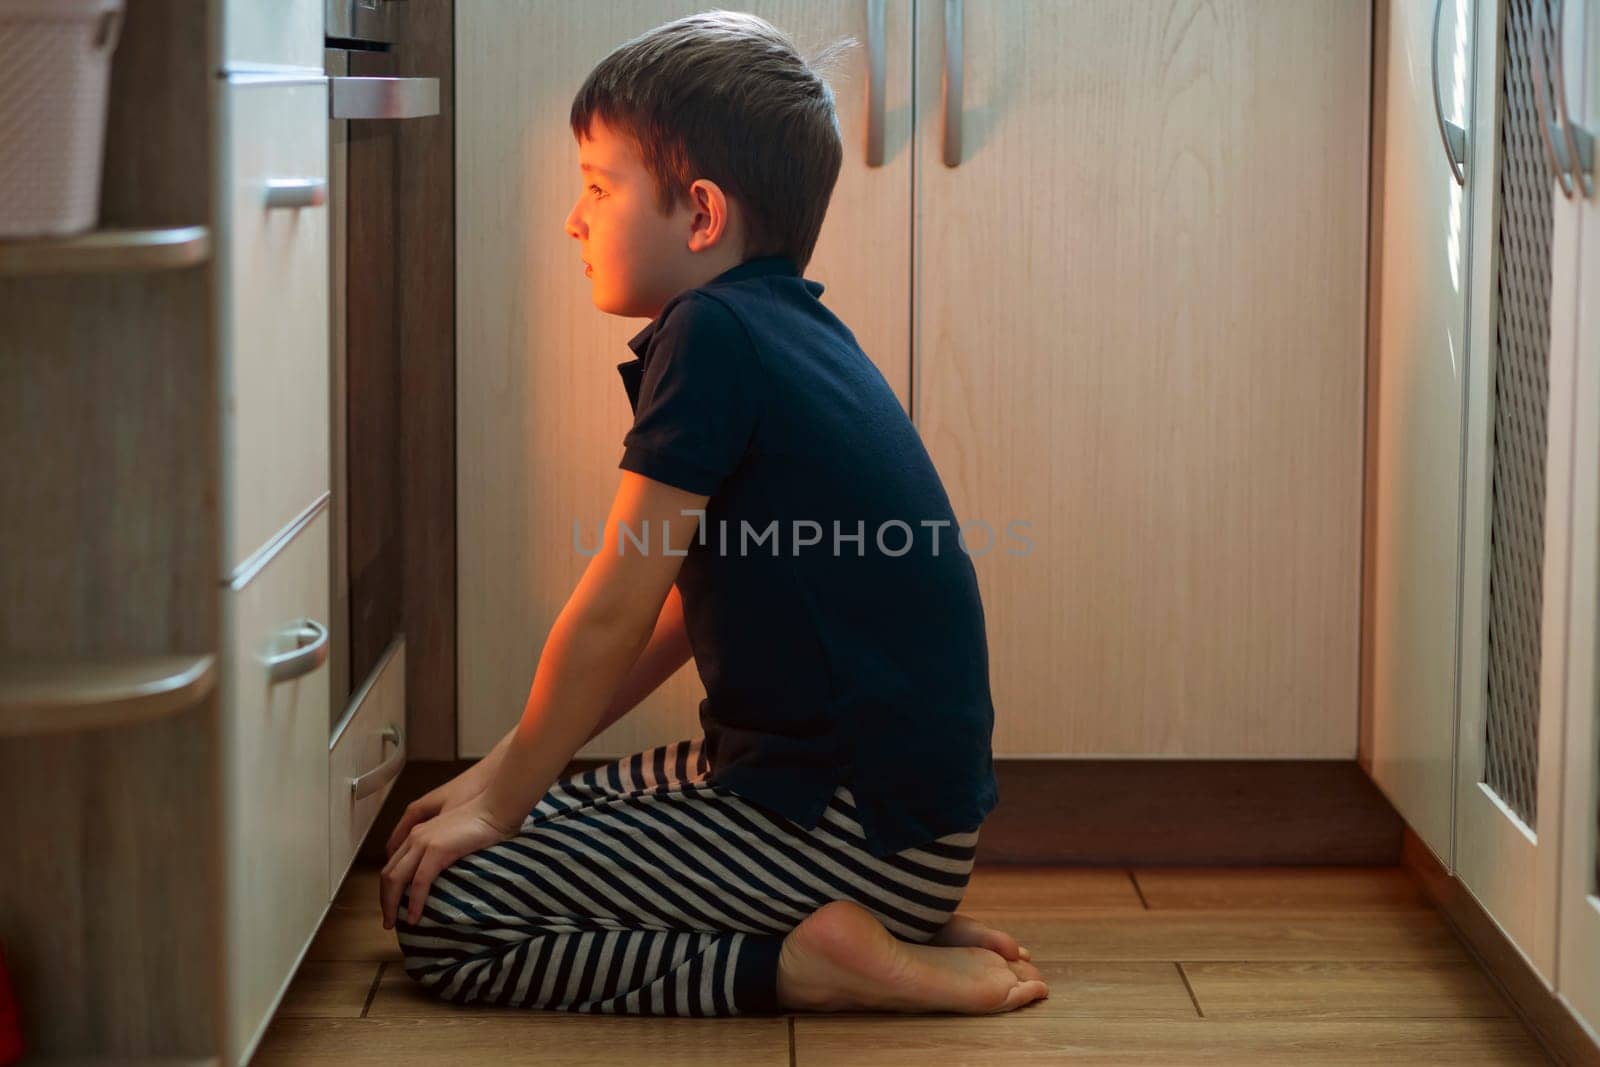 A child is sitting near the oven in the kitchen and waiting. Curious boy is watching through the glass of kitchen oven. Baking pizza, muffins , cupcakes or cookies.